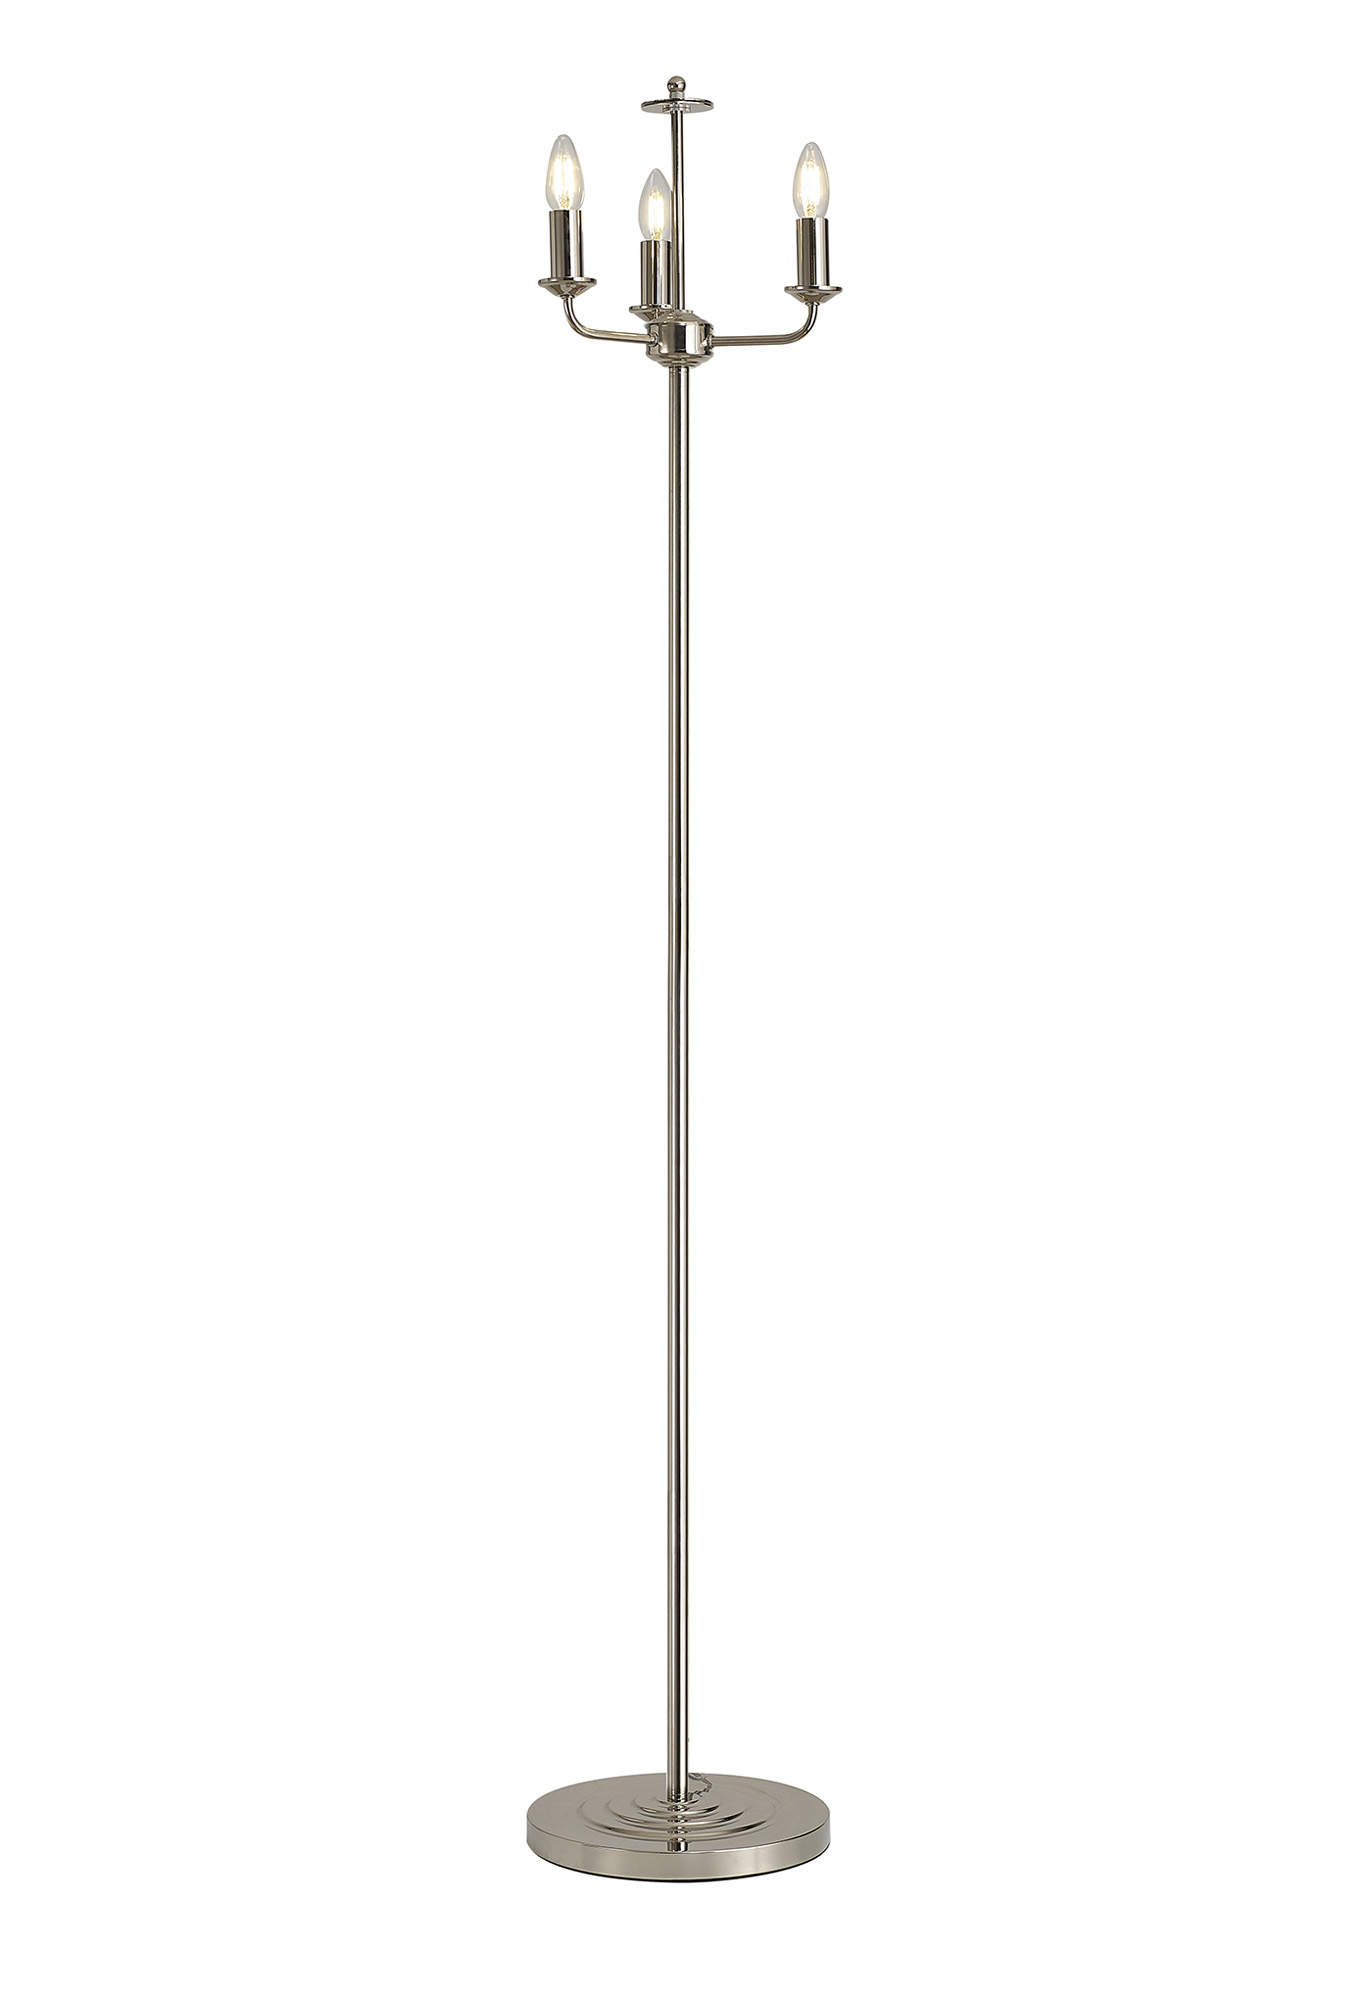 D0685  Banyan Switched Floor Lamp 3 Light Polished Nickel